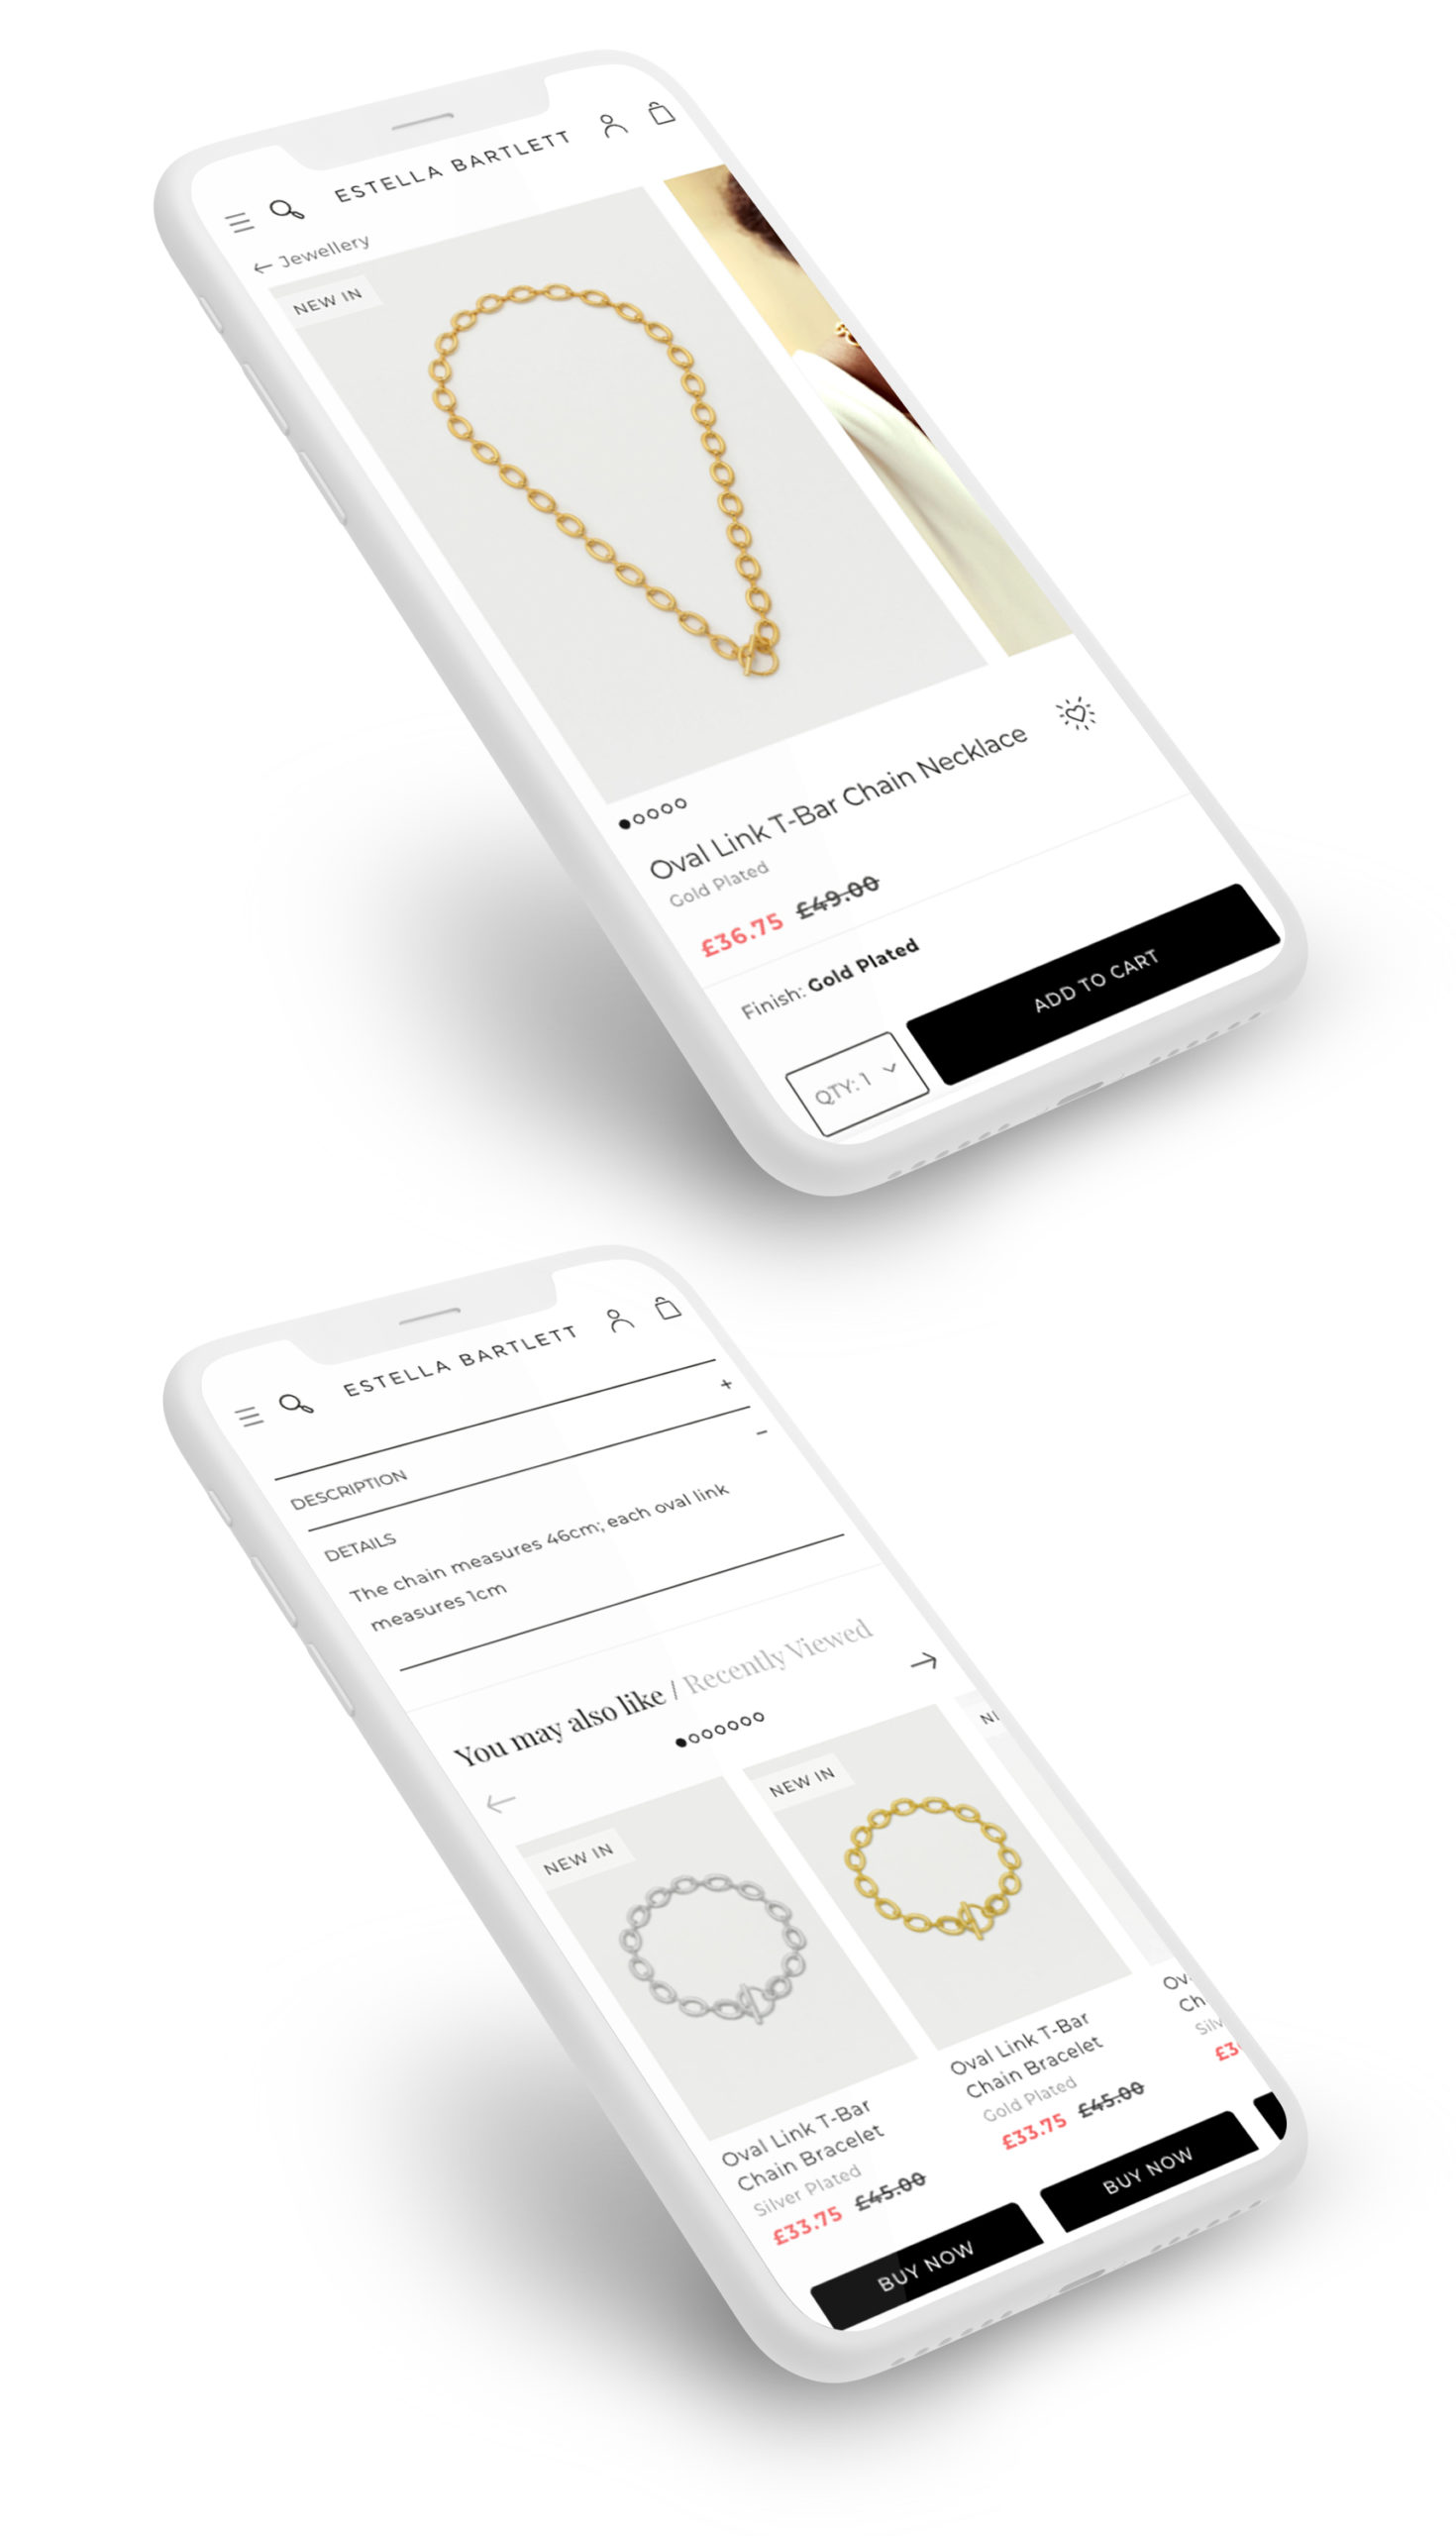 estella bartlett product page on a mobile device